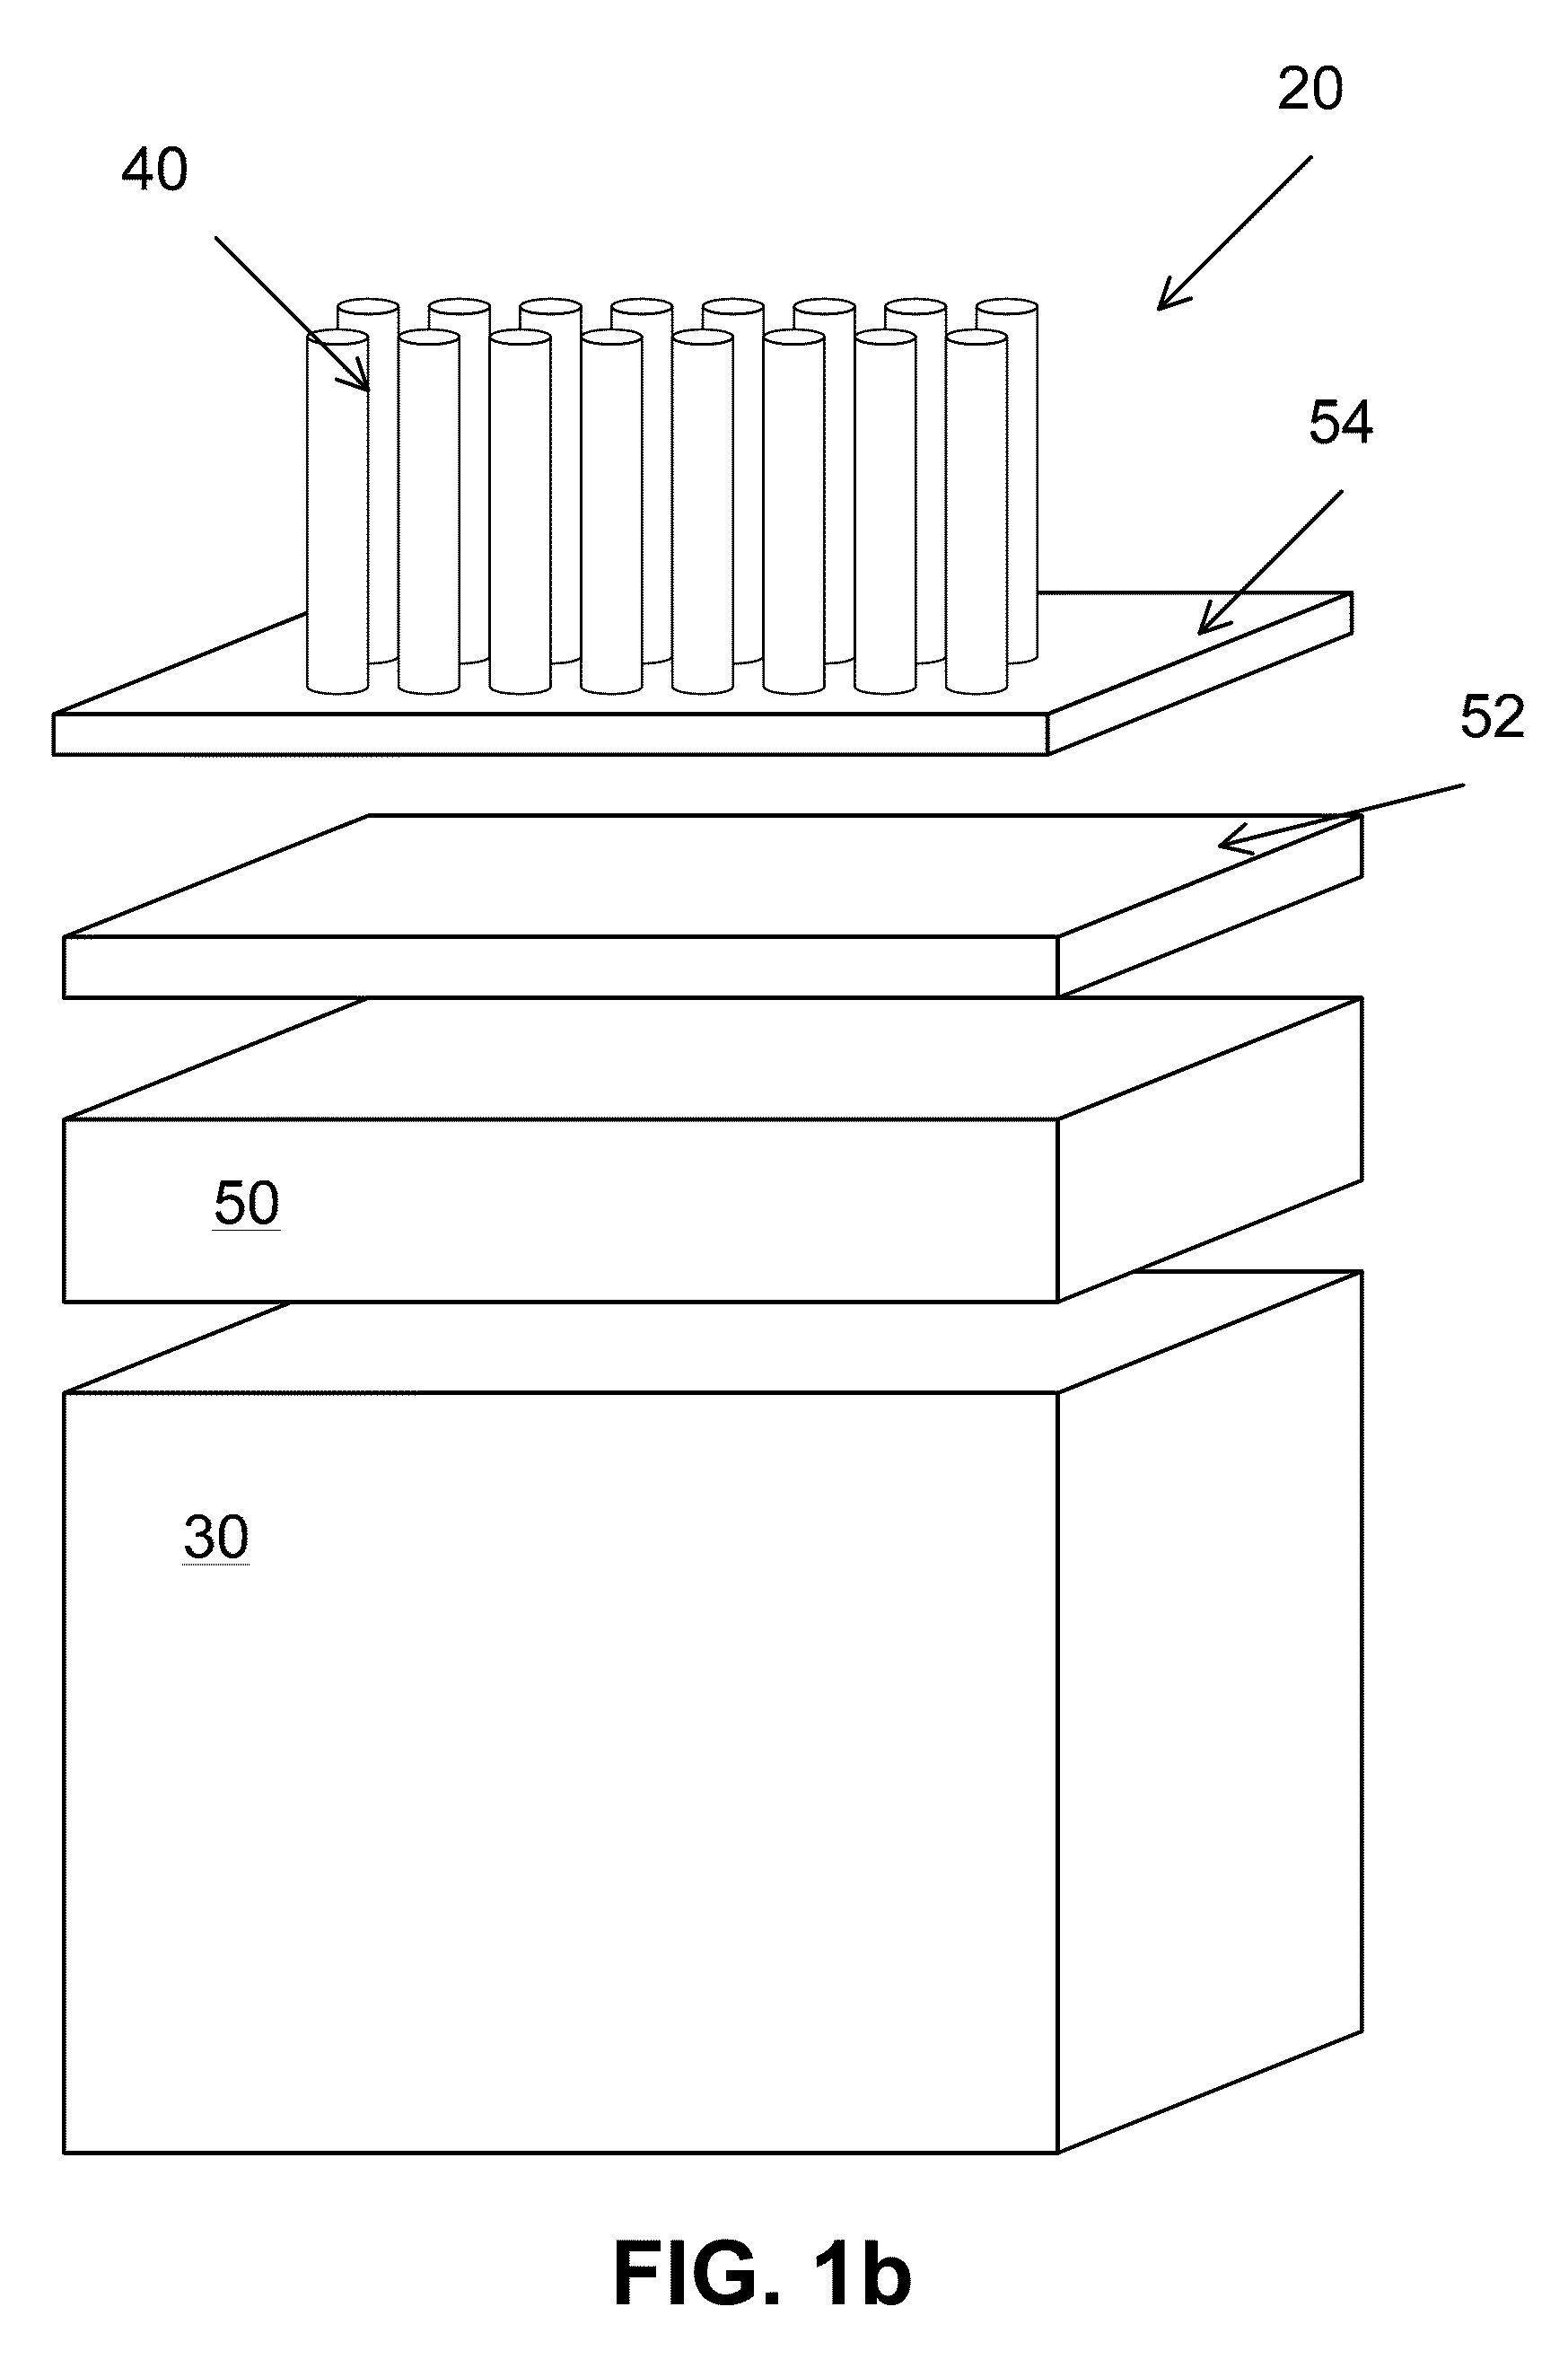 Methods for attaching carbon nanotubes to a carbon substrate